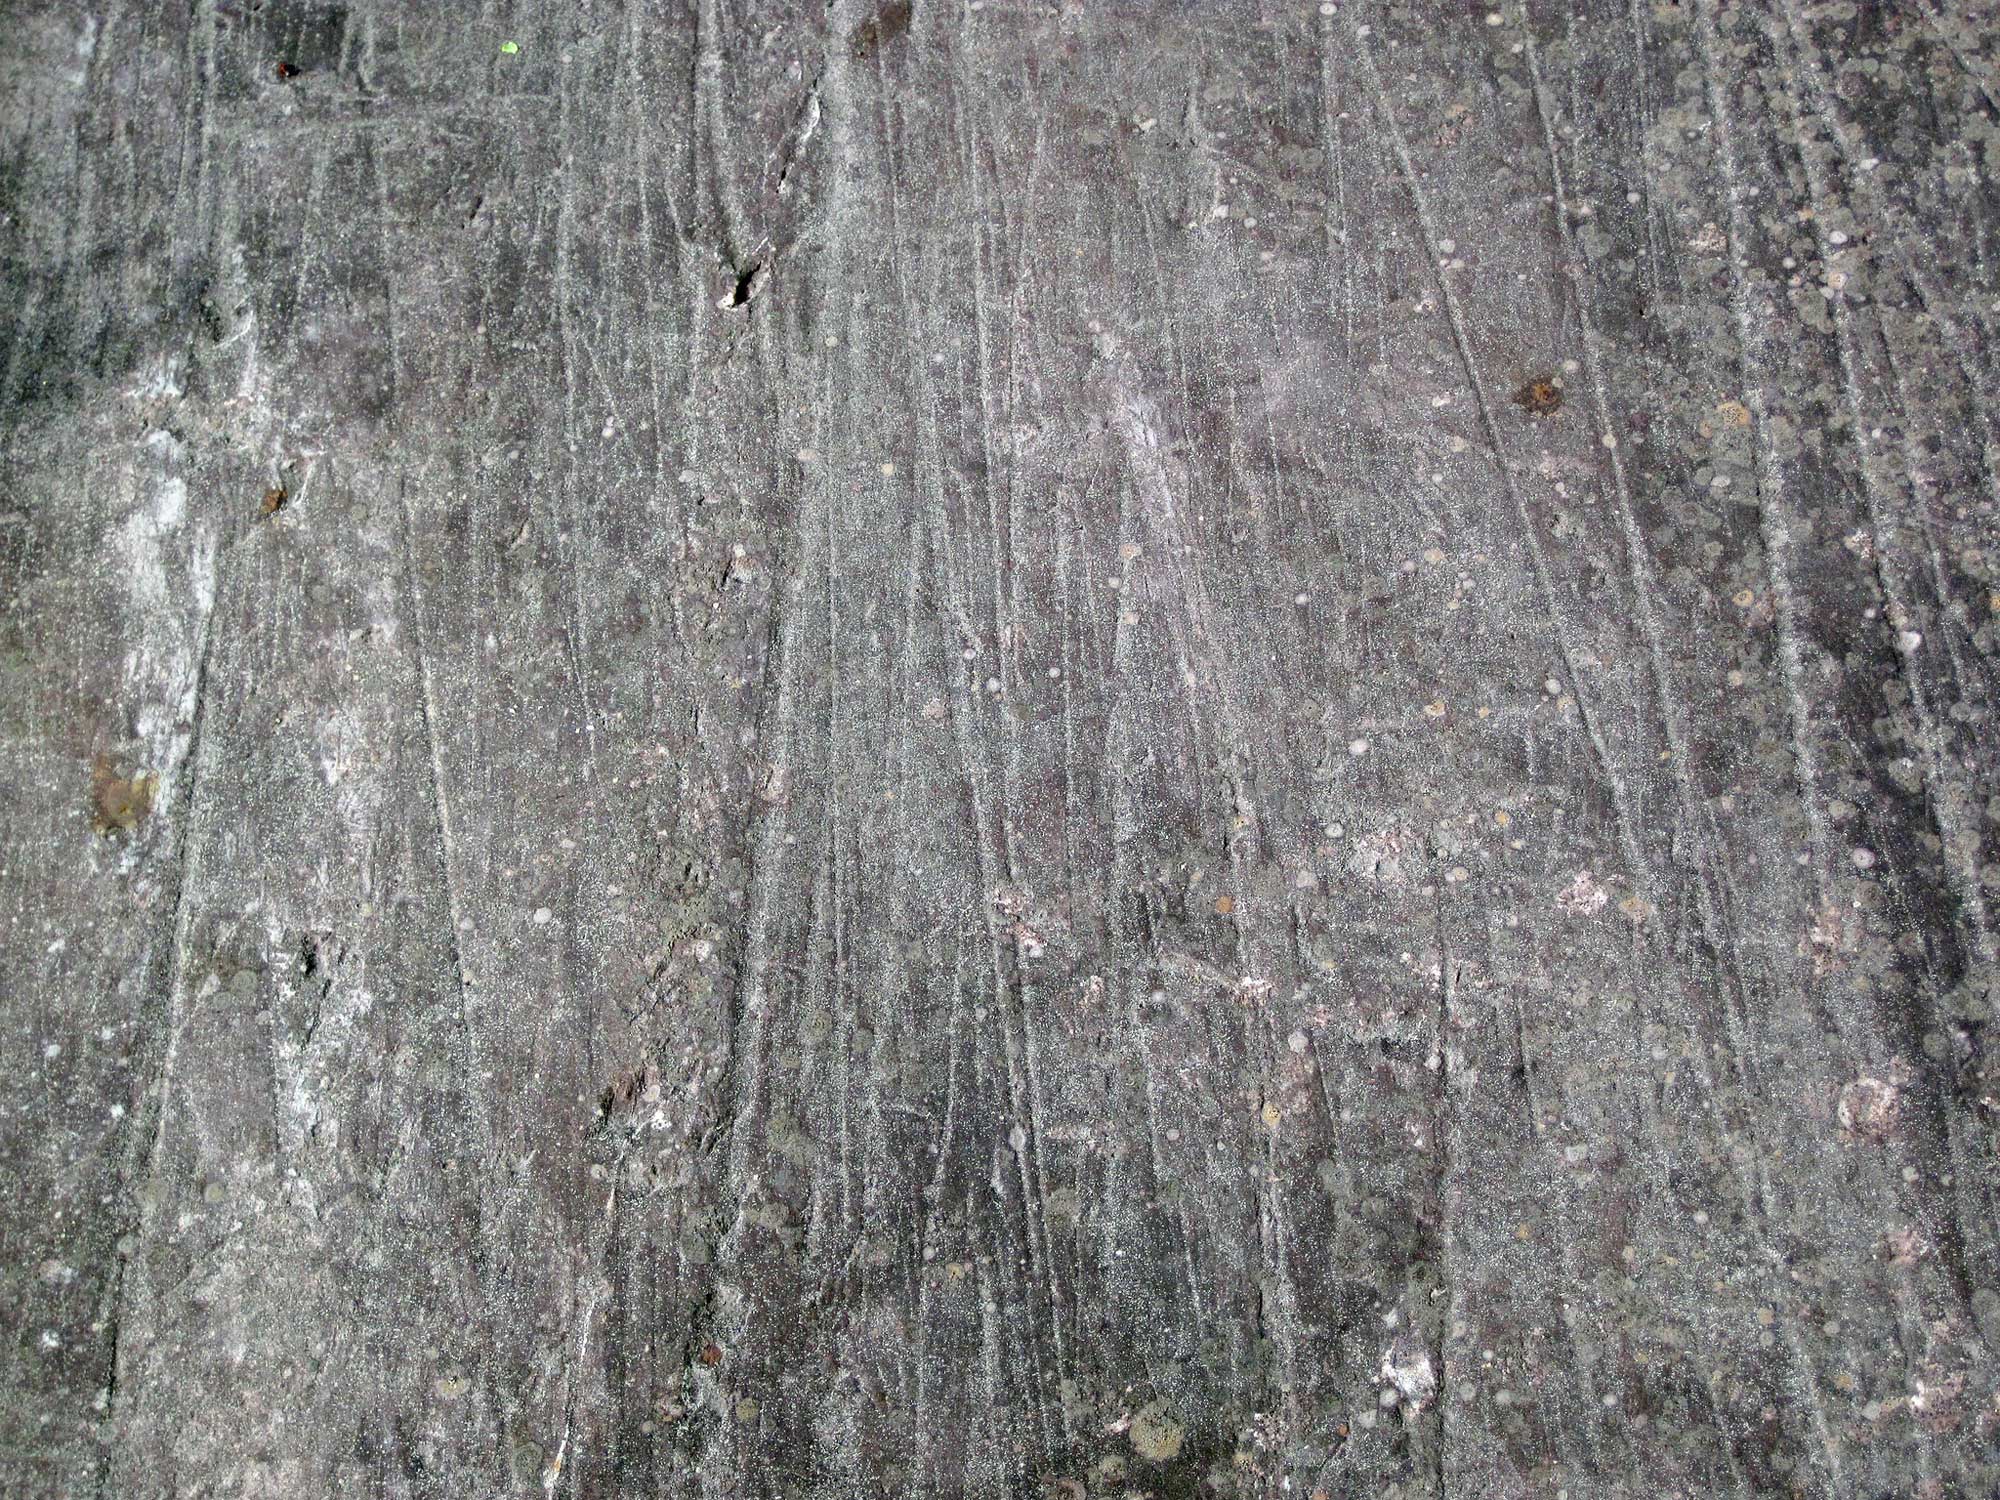 Photograph of Pleistocene glacial striations on Precambrian rock in Minnesota. The photo shows the surface of a gray rock marked by thin longitudinal striations that extend from the top to the bottom of the image.